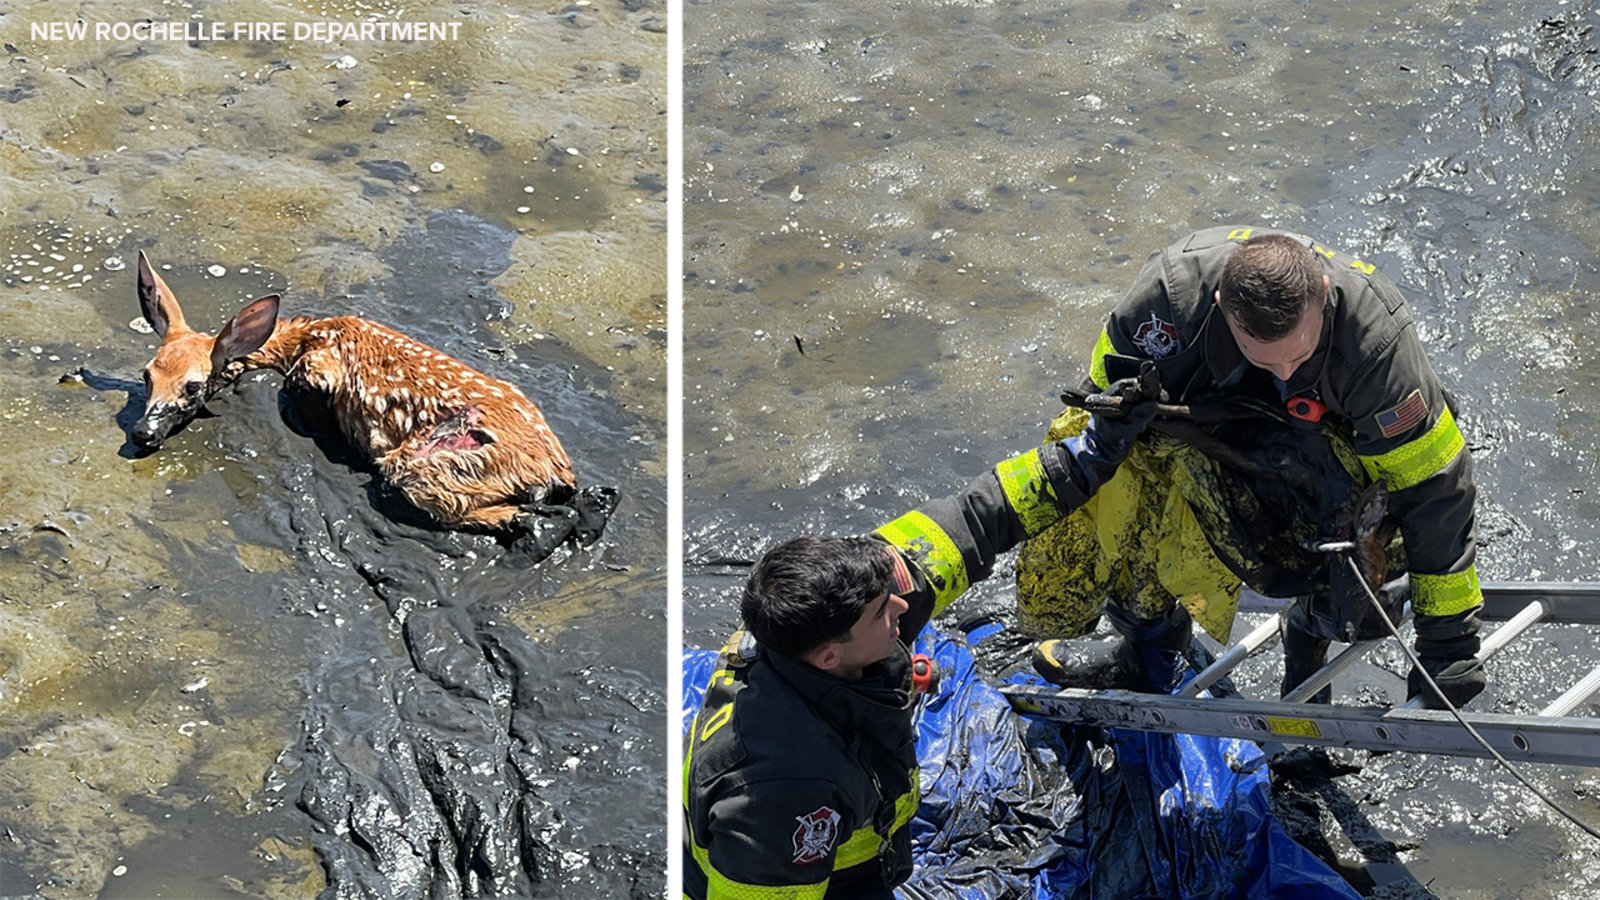 New Rochelle firefighters rescue deer that got stuck in the mud in Westchester County [Video]